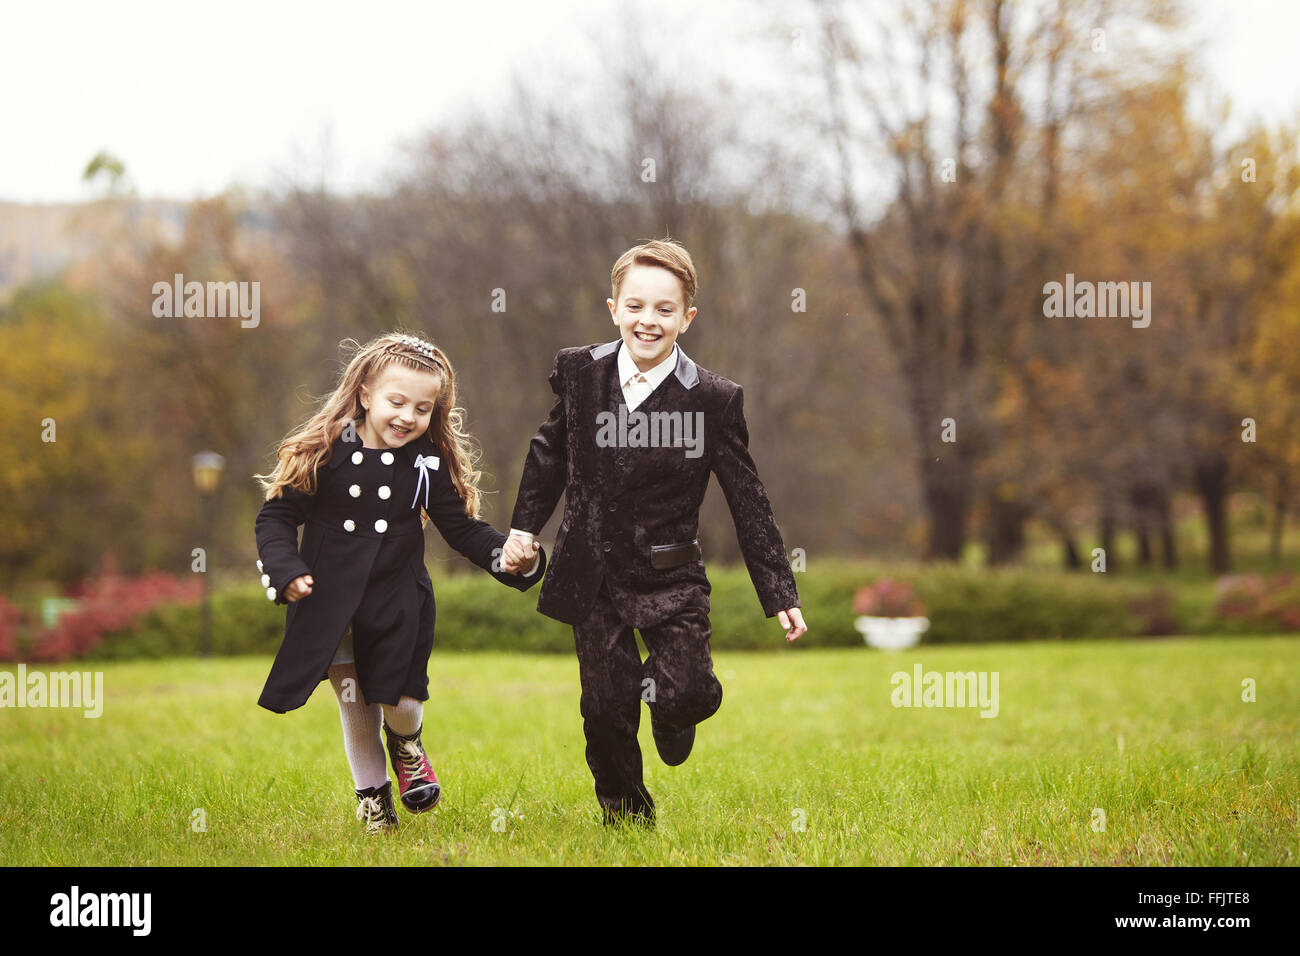 Brother and sister kids running Stock Photo